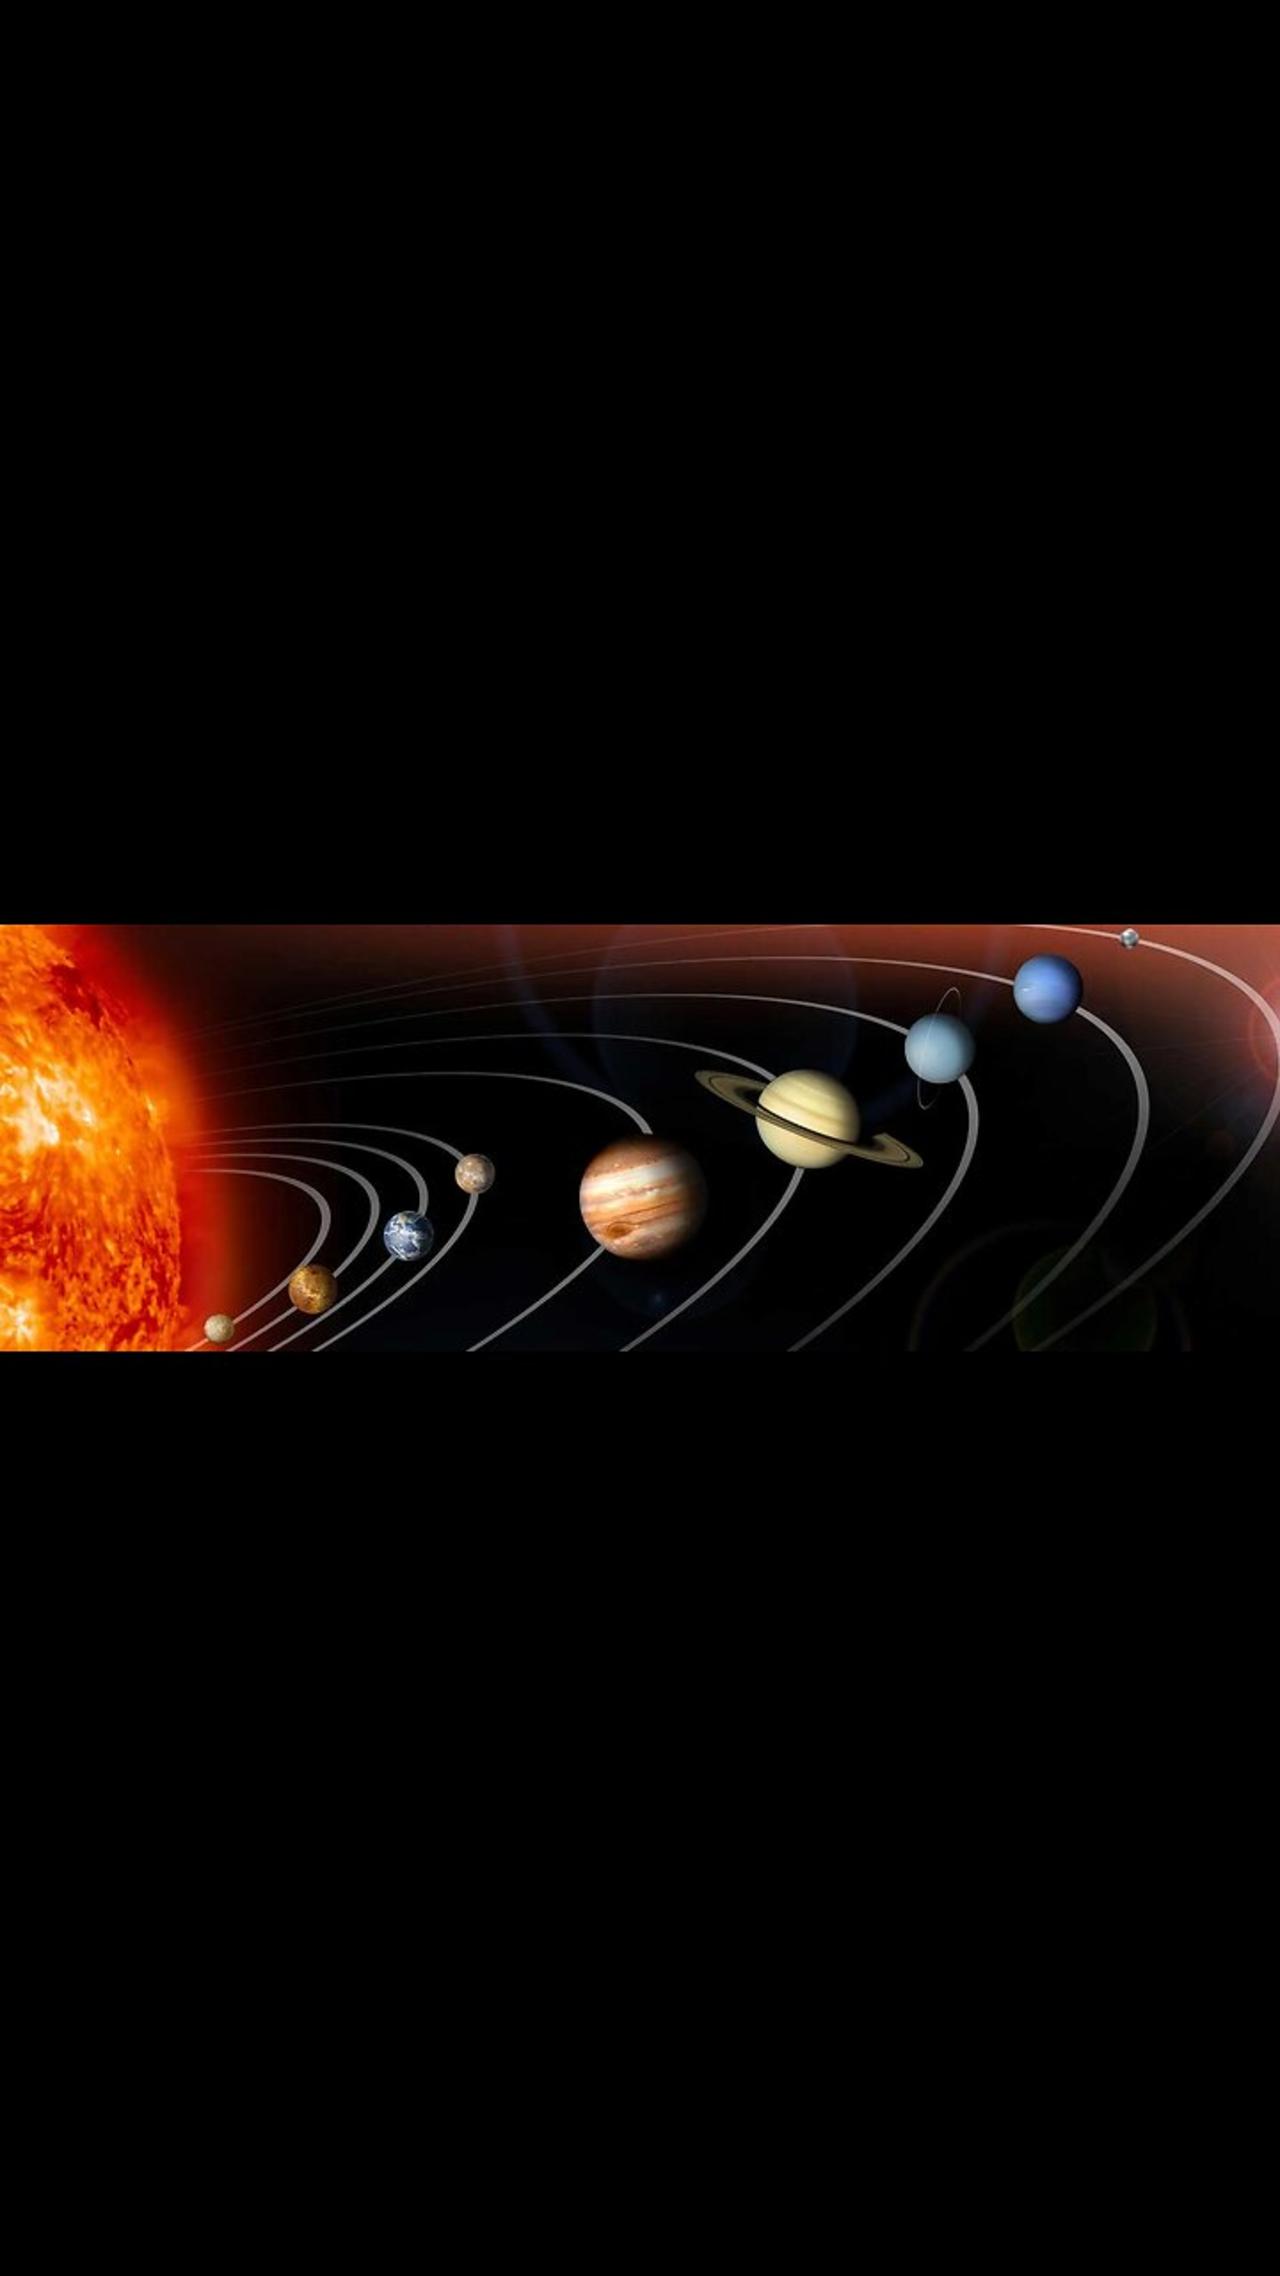 Real Images of Solar system planets